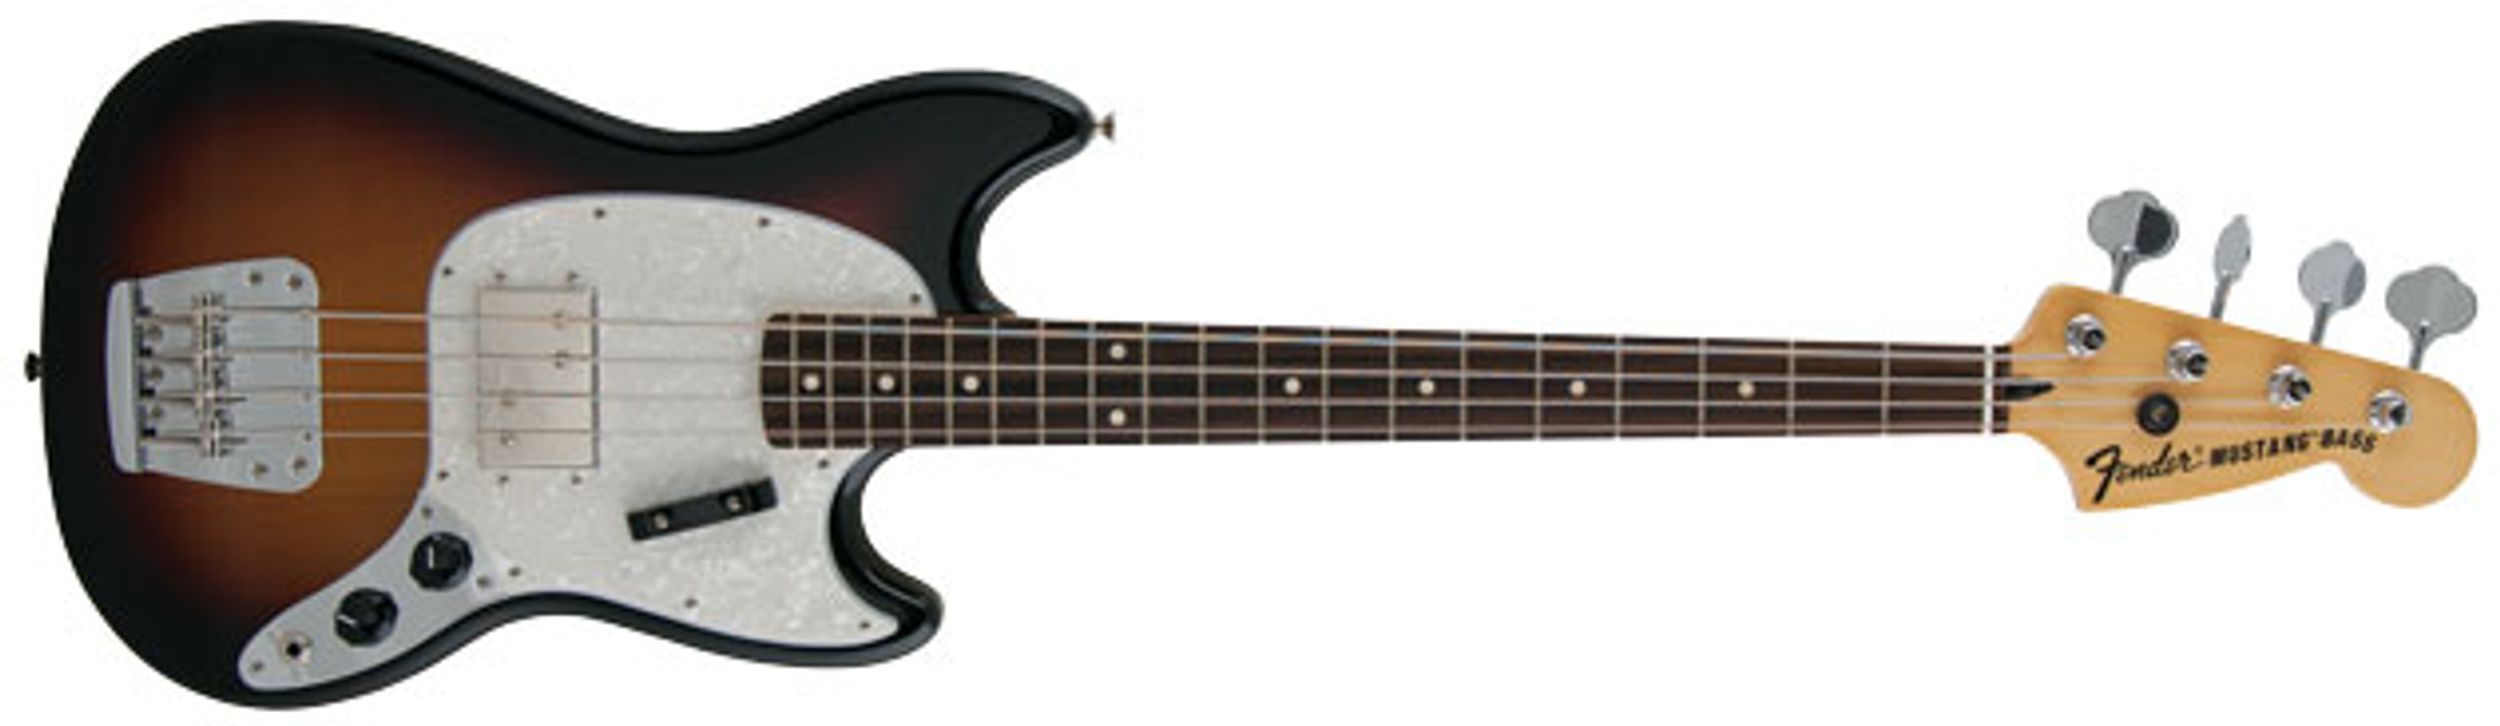 Fender Pawn Shop Mustang Bass Review